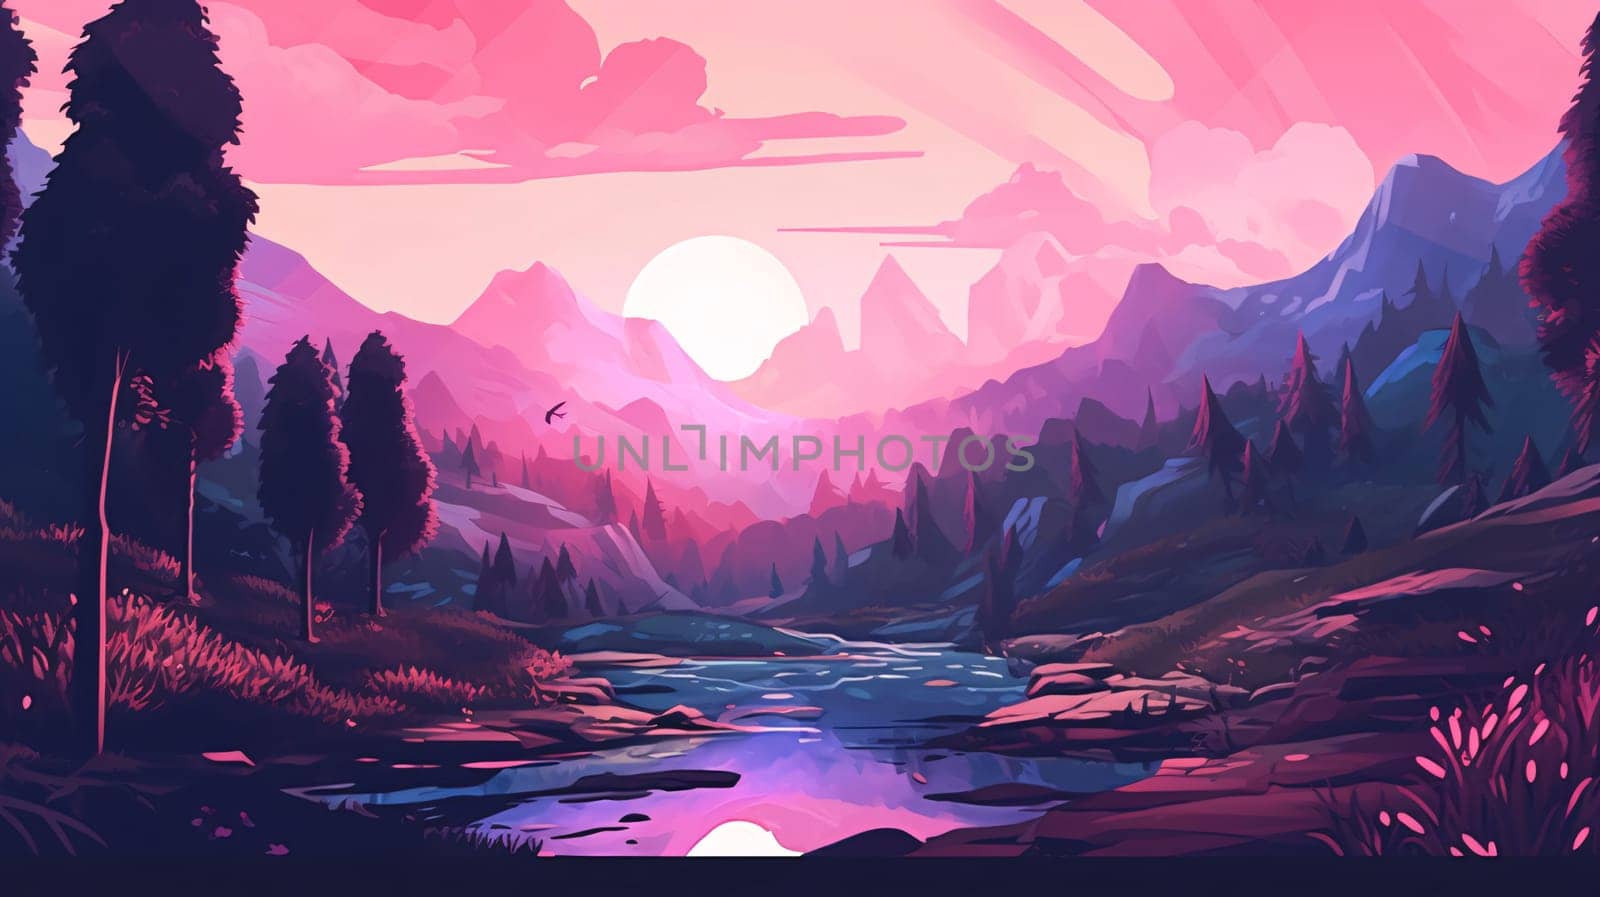 Banner: Landscape with mountains, river, forest and sunset. Vector illustration